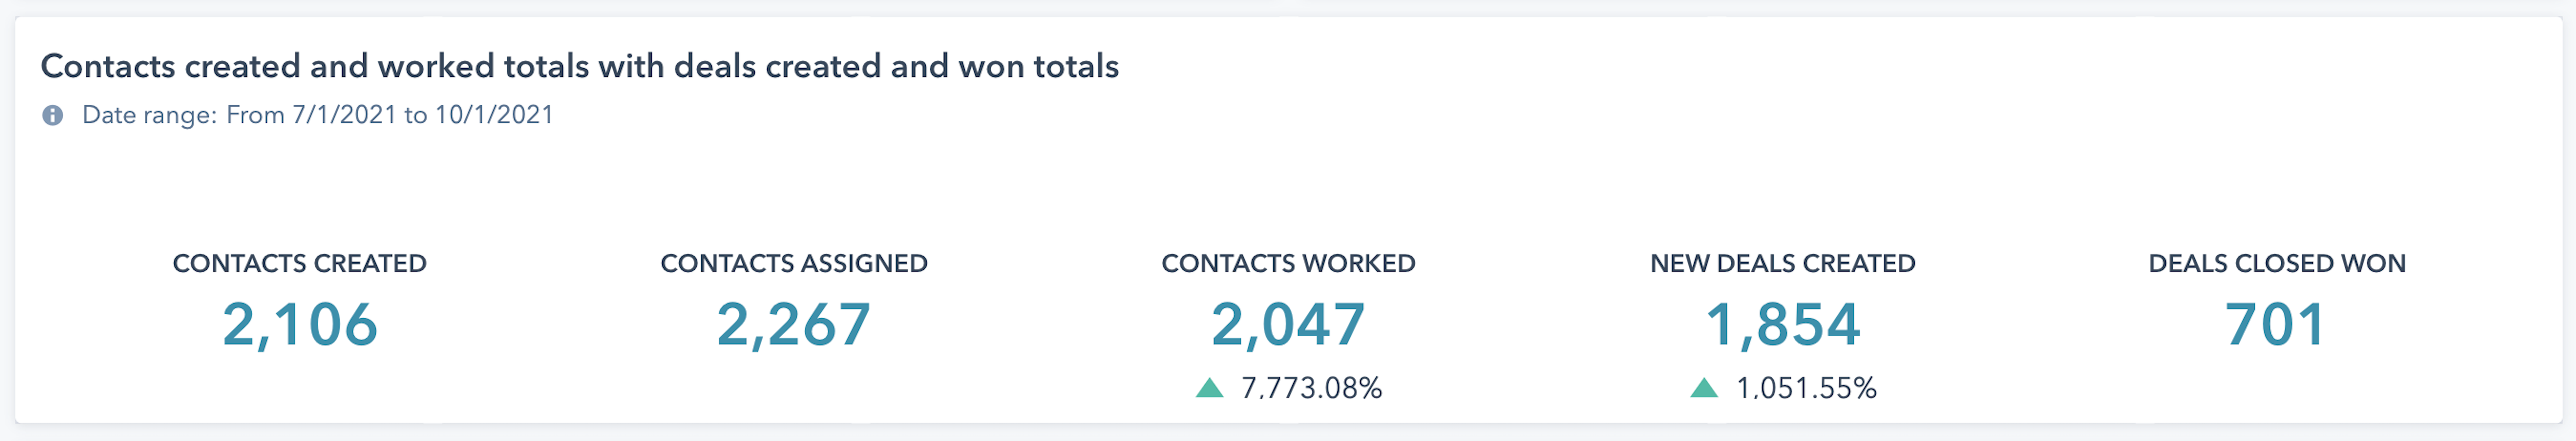 HubSpot Reports - Contacts and Deals Worked